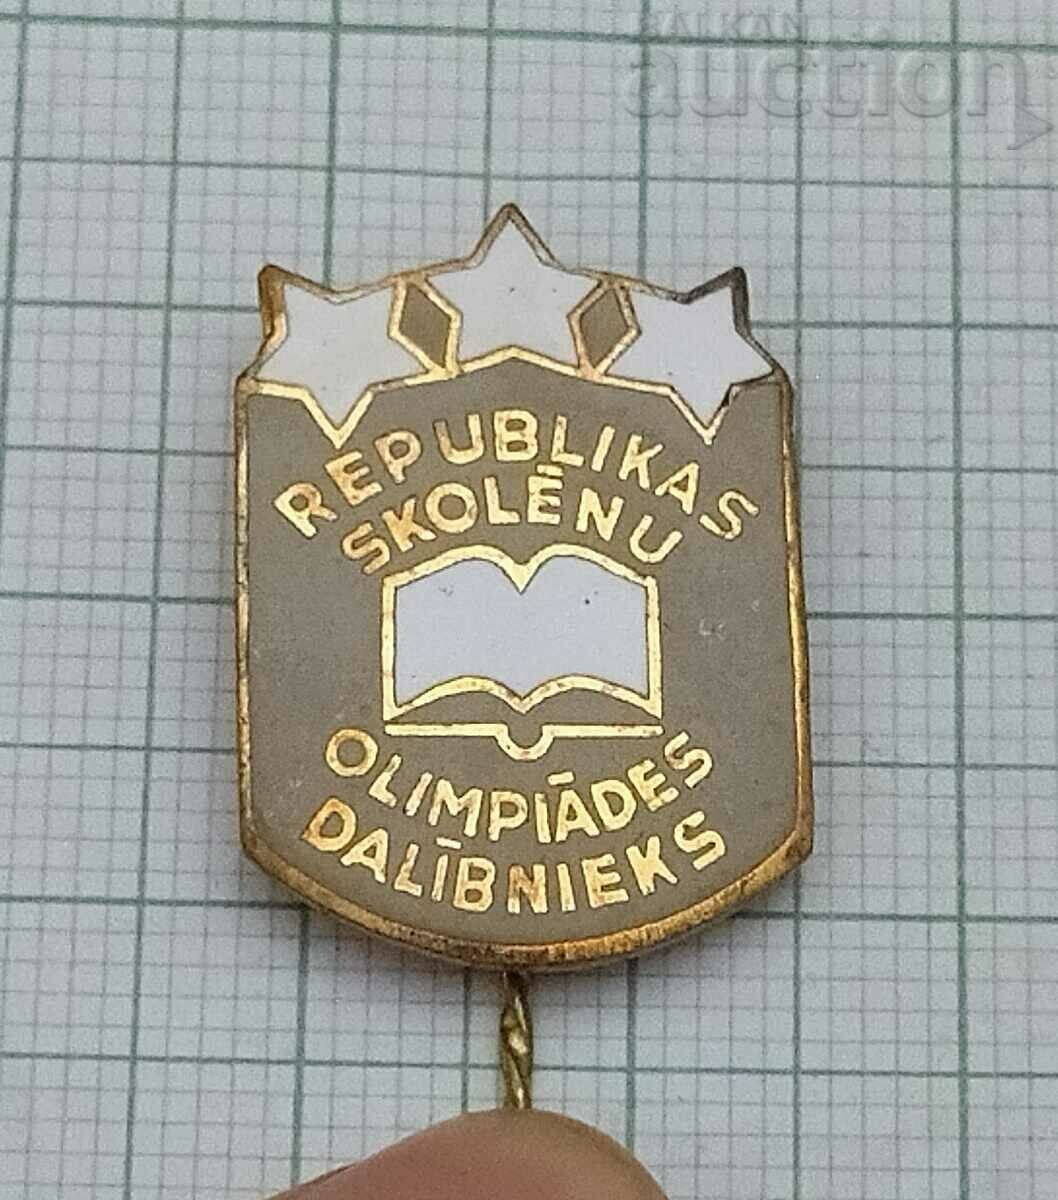 LATVIA PARTICIPANT IN REPUBLICAN STUDENT OLYMPIAD BADGE